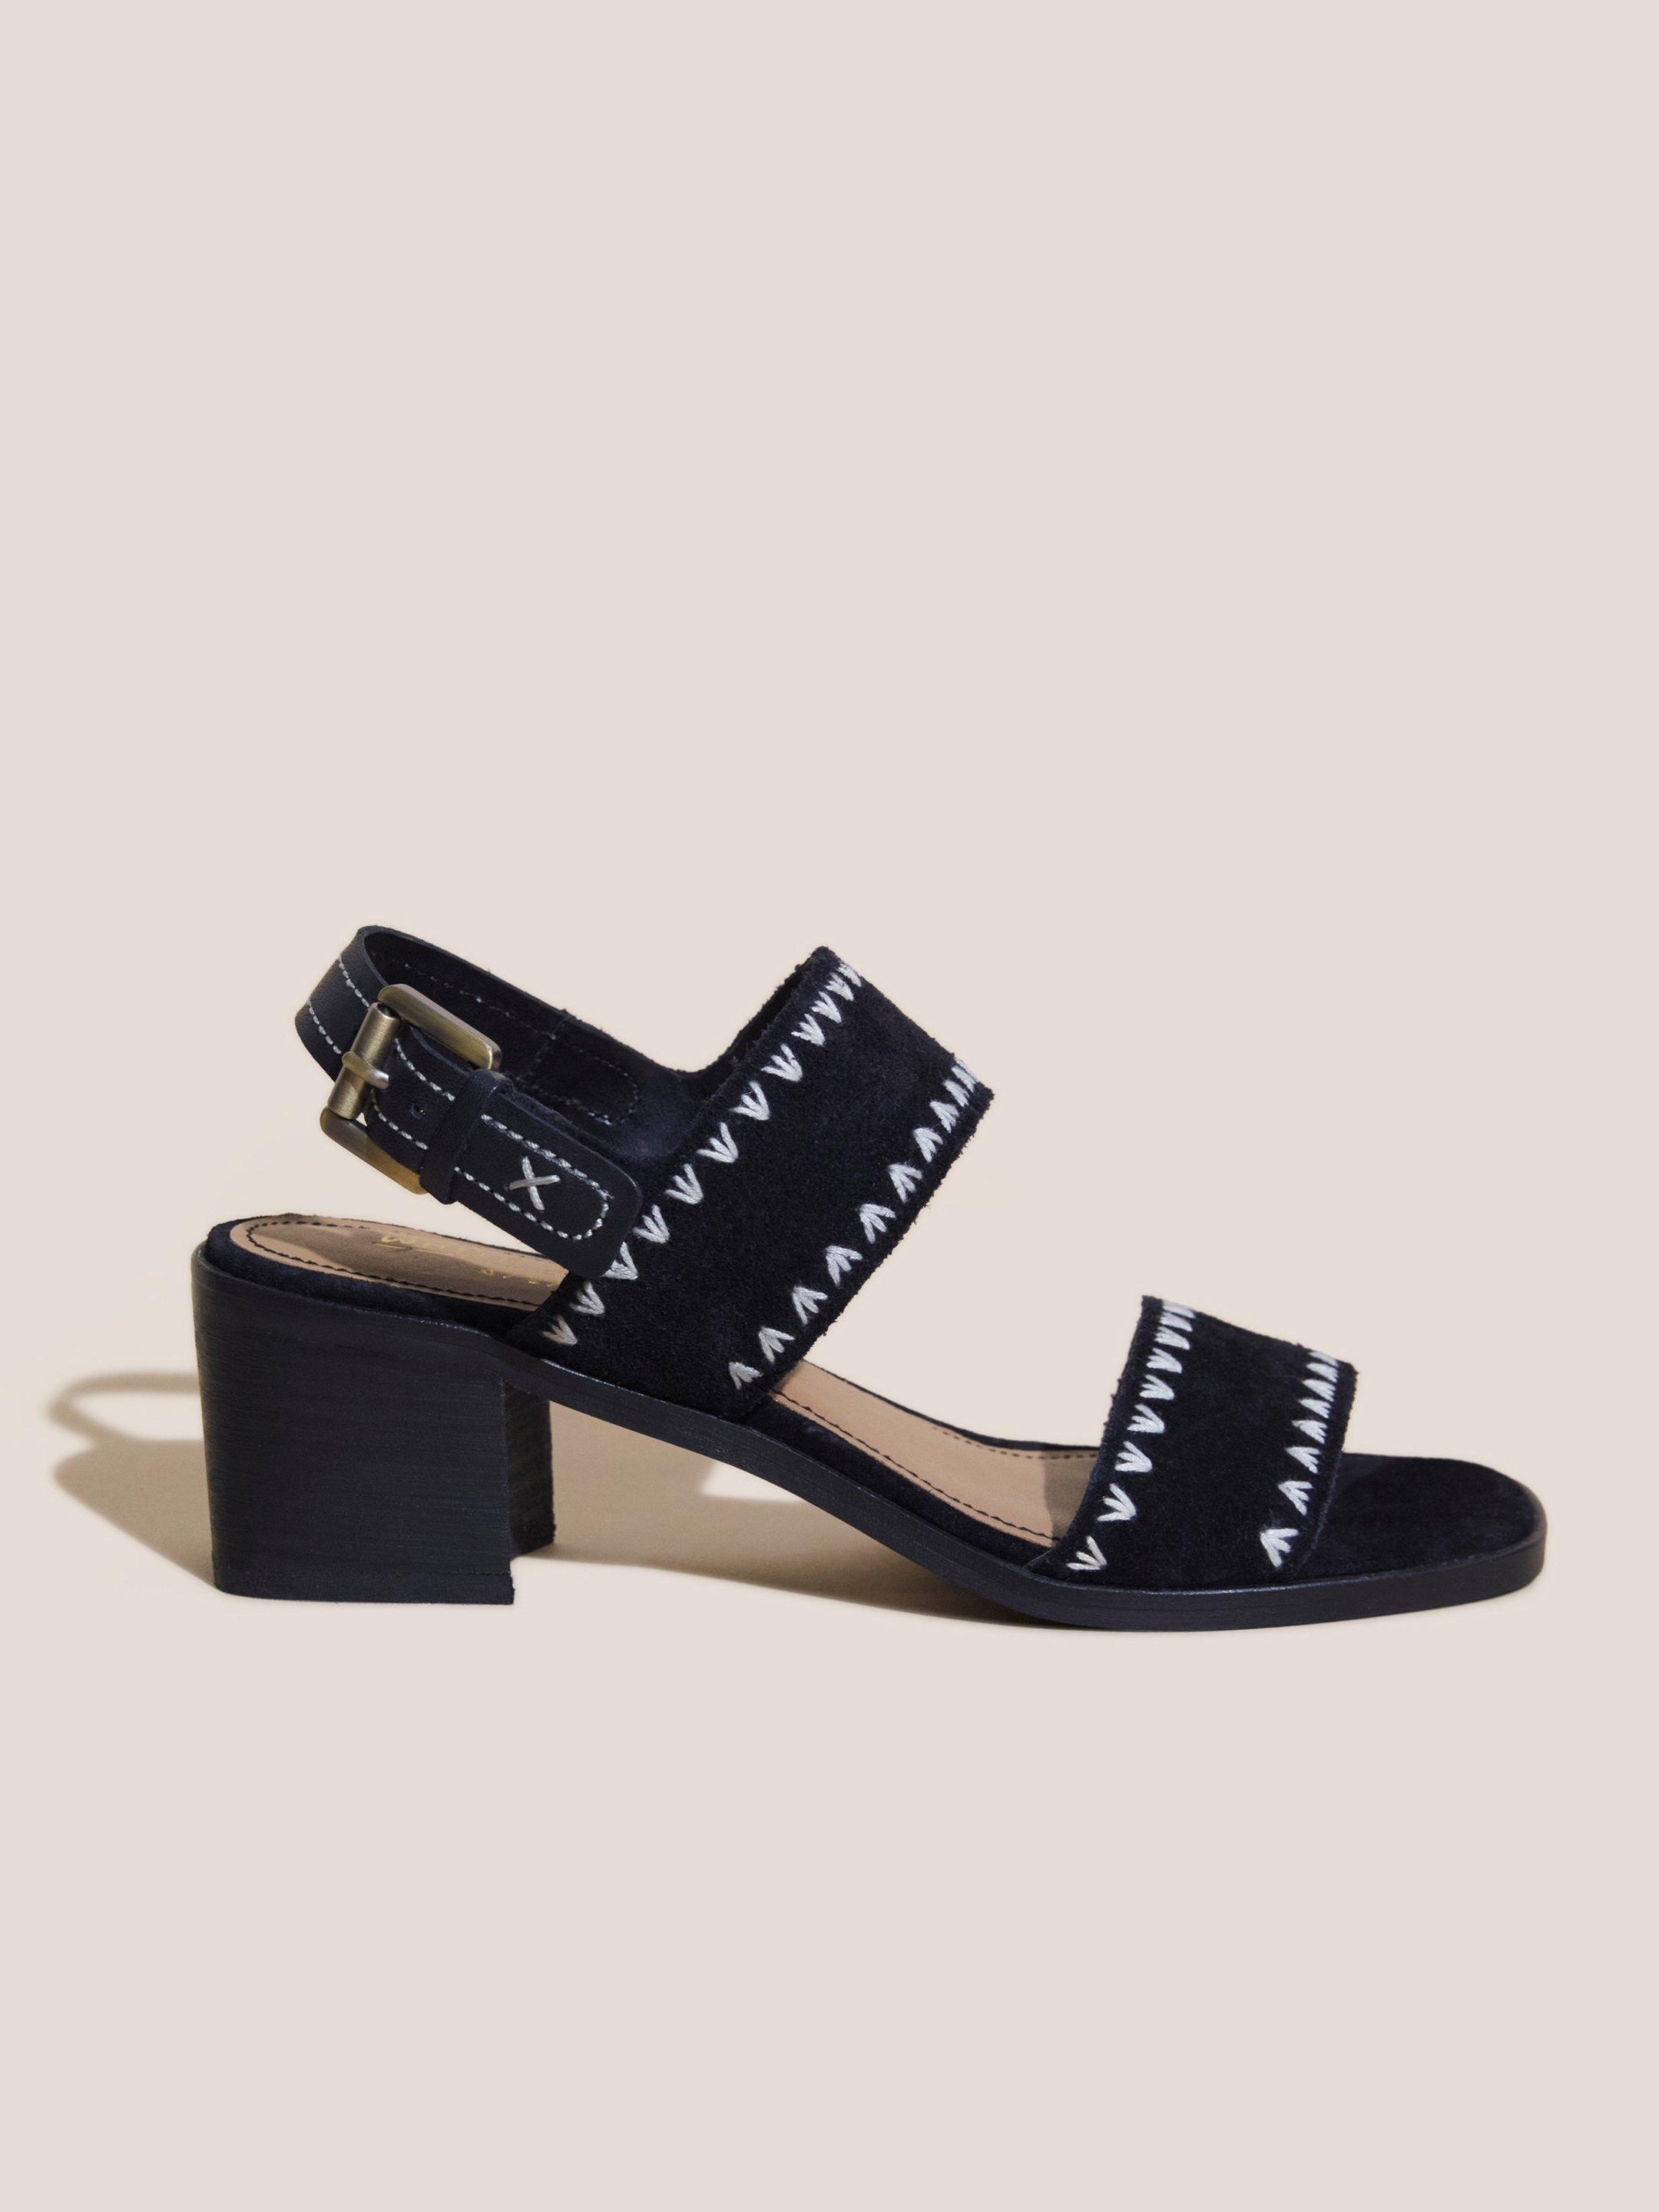 Whipstitch Block Heel Sandal in PURE BLK - MODEL FRONT